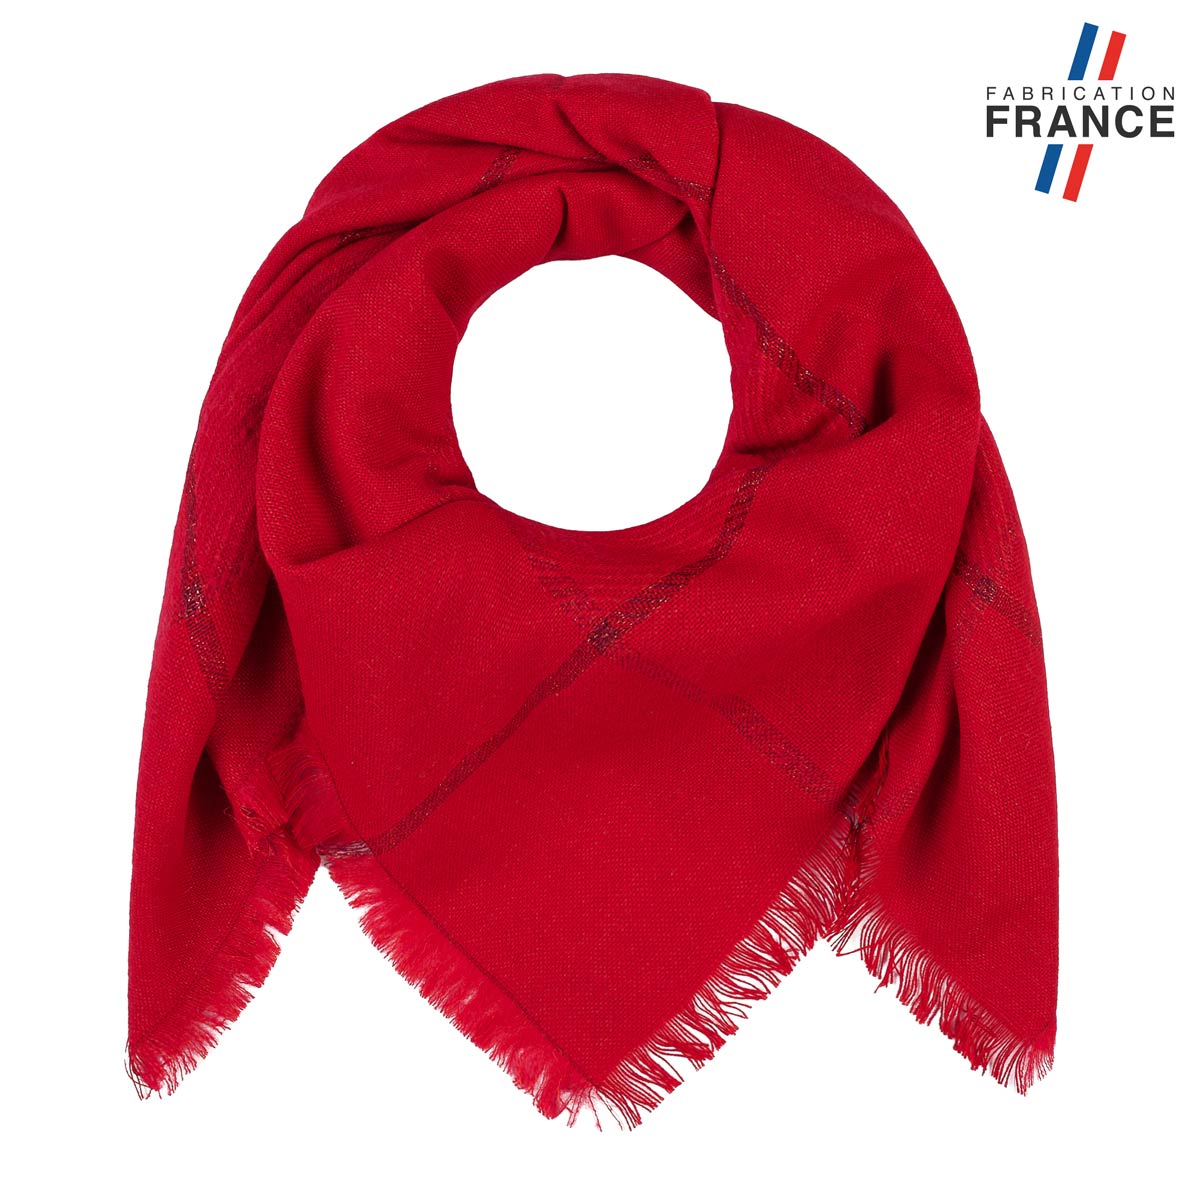 AT-06925_F12-1FR_Echarpe-mohair-carre-rouge-fabrication-francaise